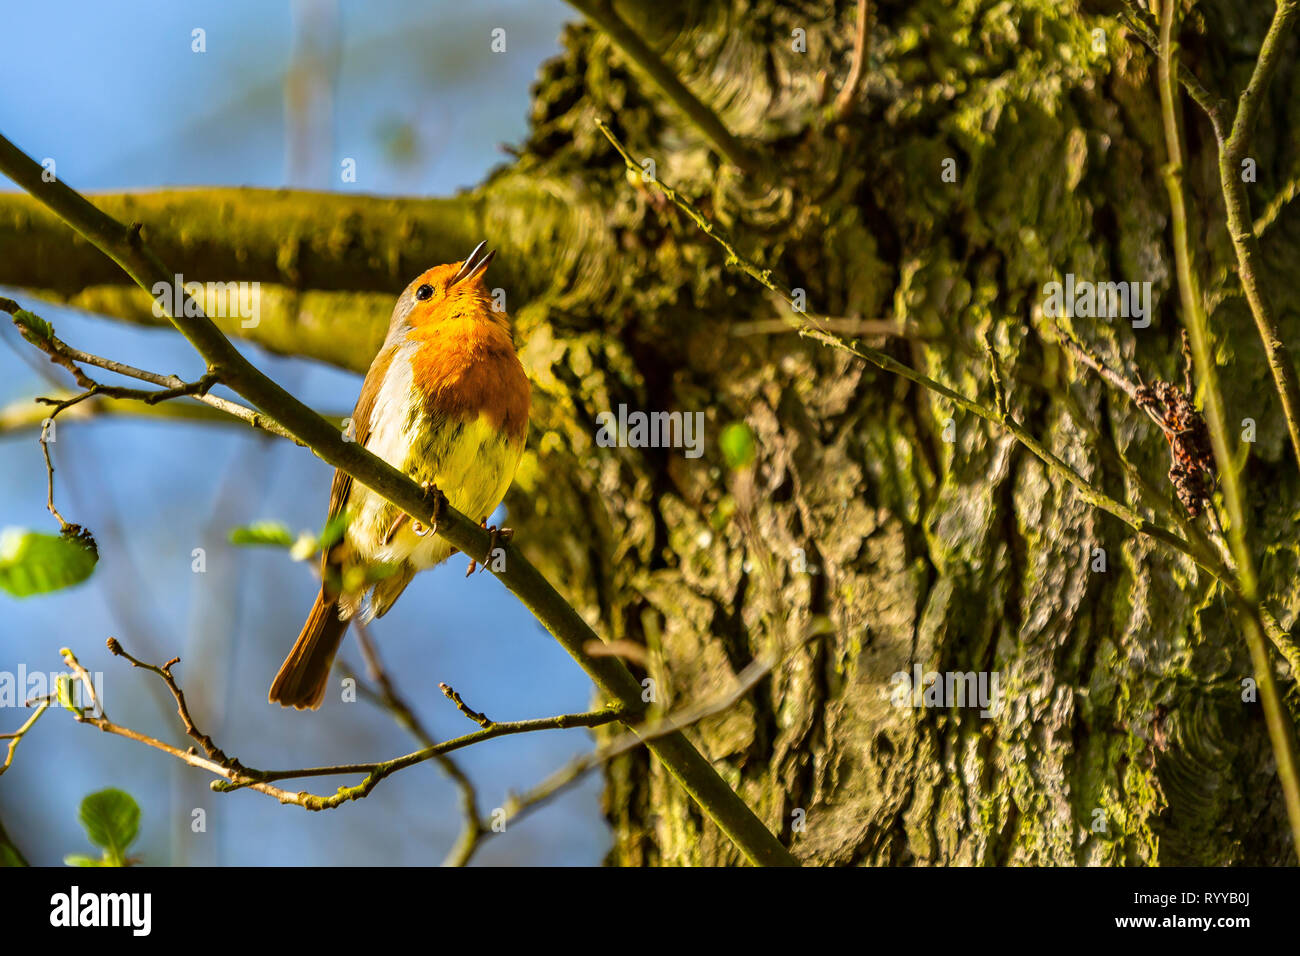 A british european robin singing in a tree Stock Photo